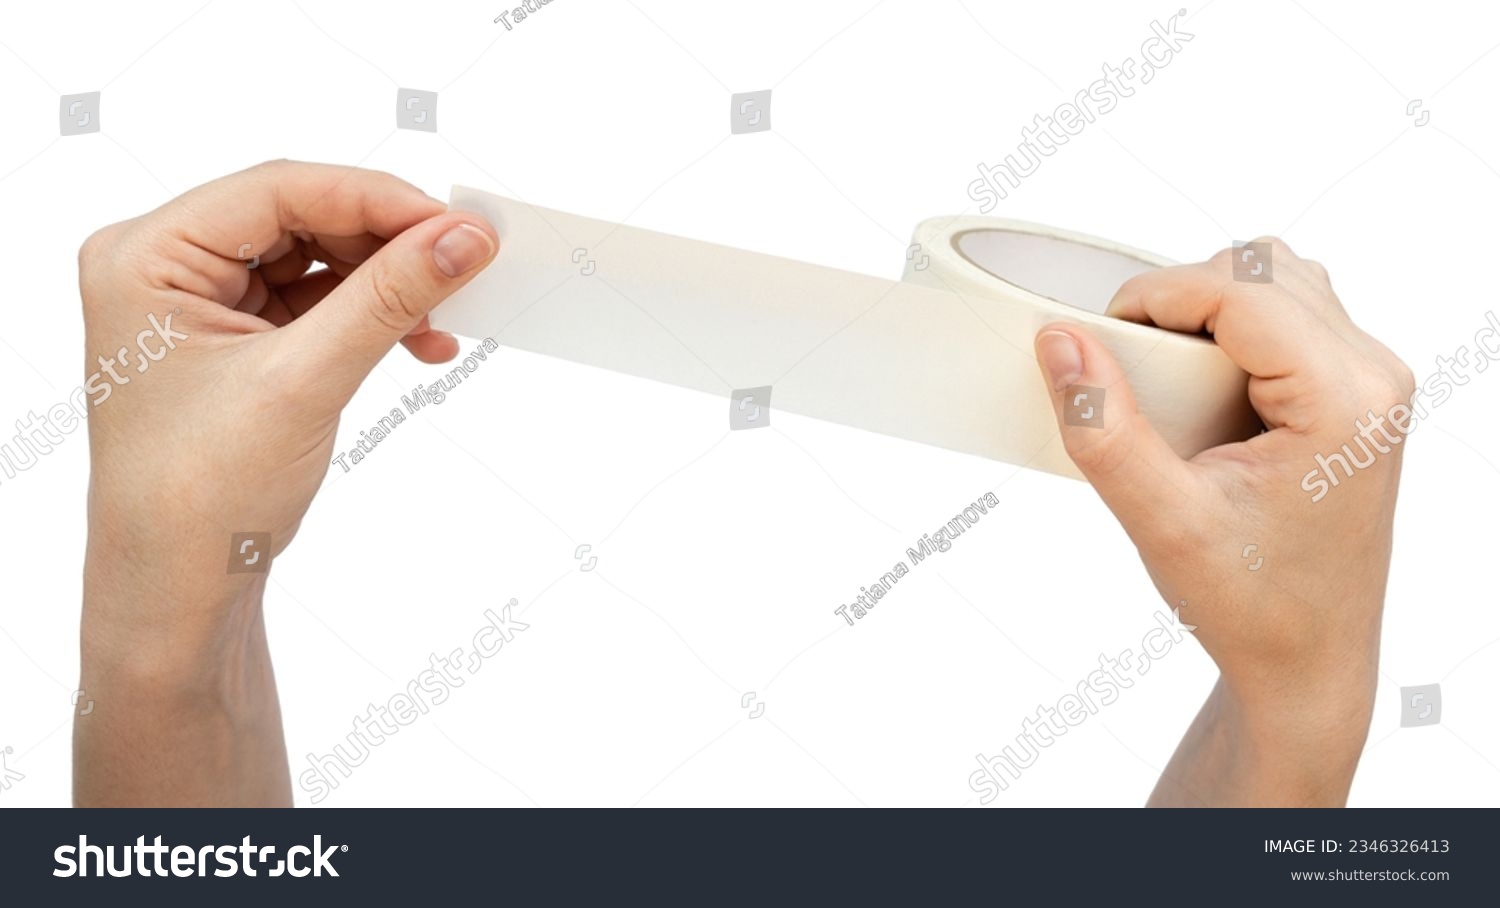 Hands hold masking tape isolated on white background. Adhesive tape is wrapped in your hands #2346326413